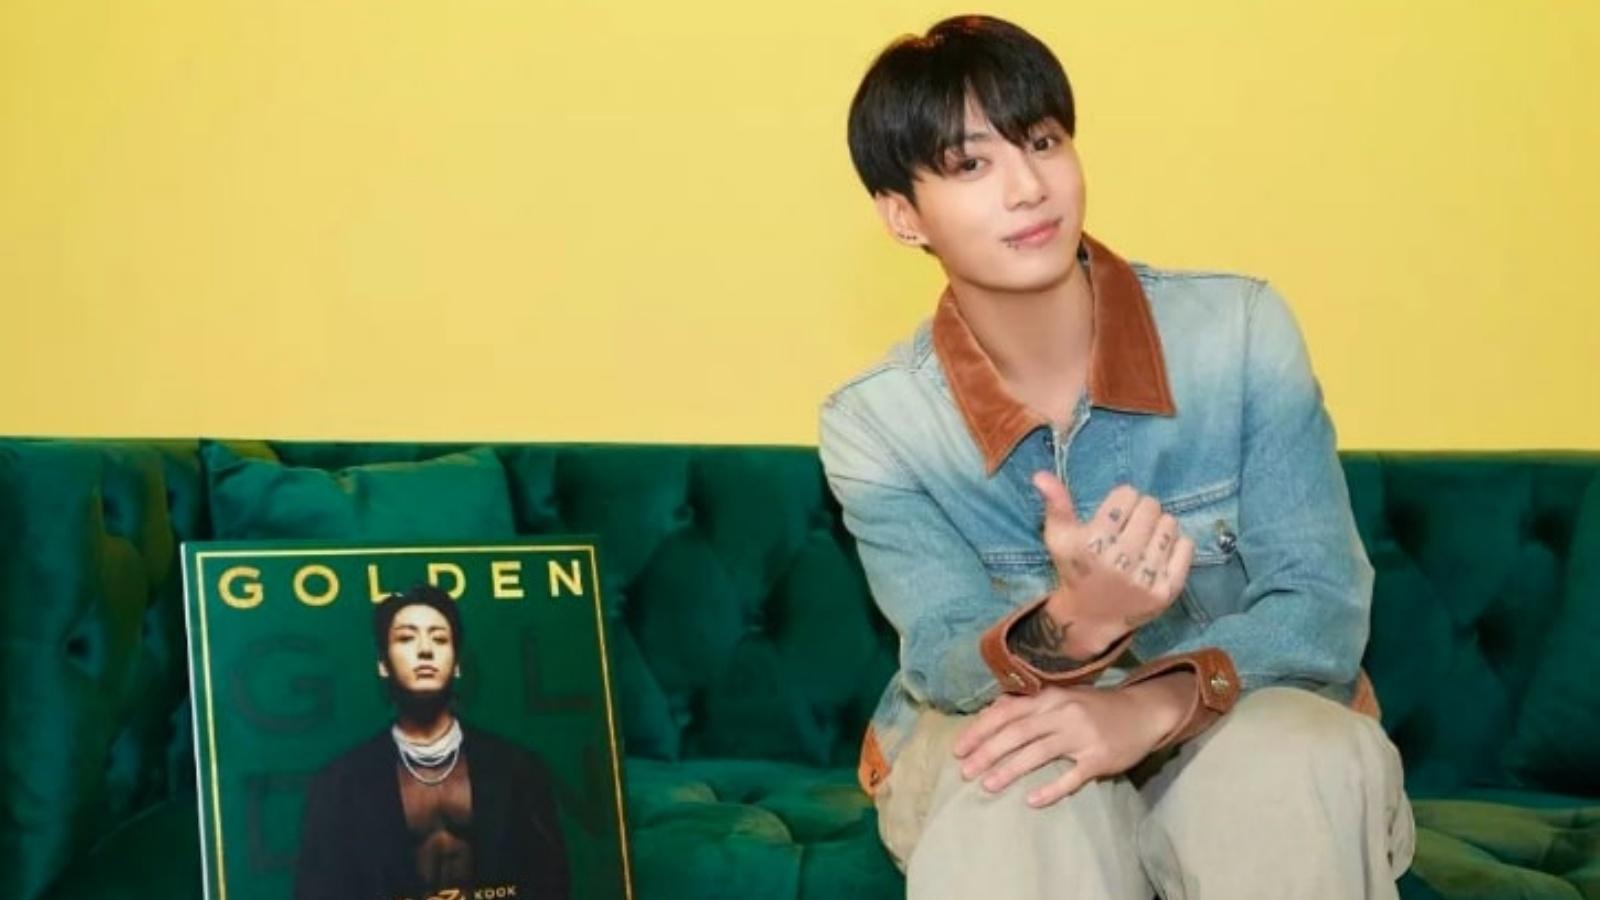 Jungkook posing with his thumb up and seated on a green sofa with his album, Golden.